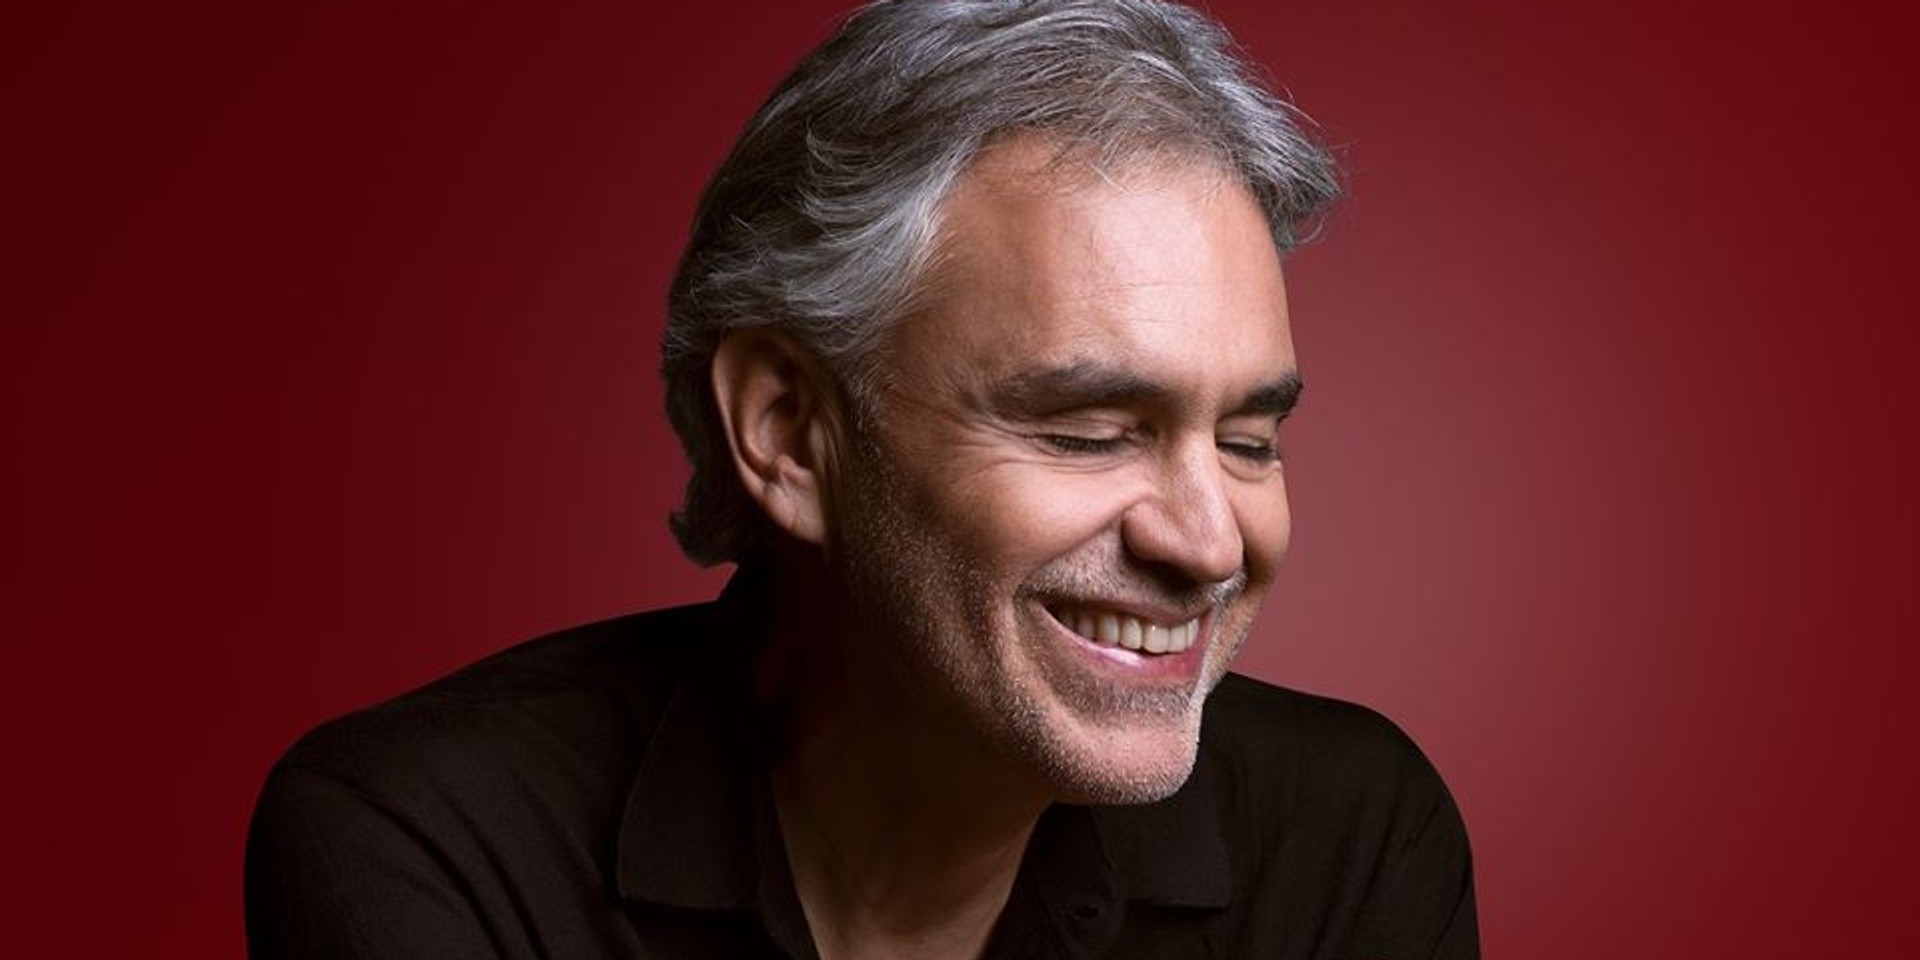 Andrea Bocelli to perform free Easter livestream concert from historic Duomo Cathedral